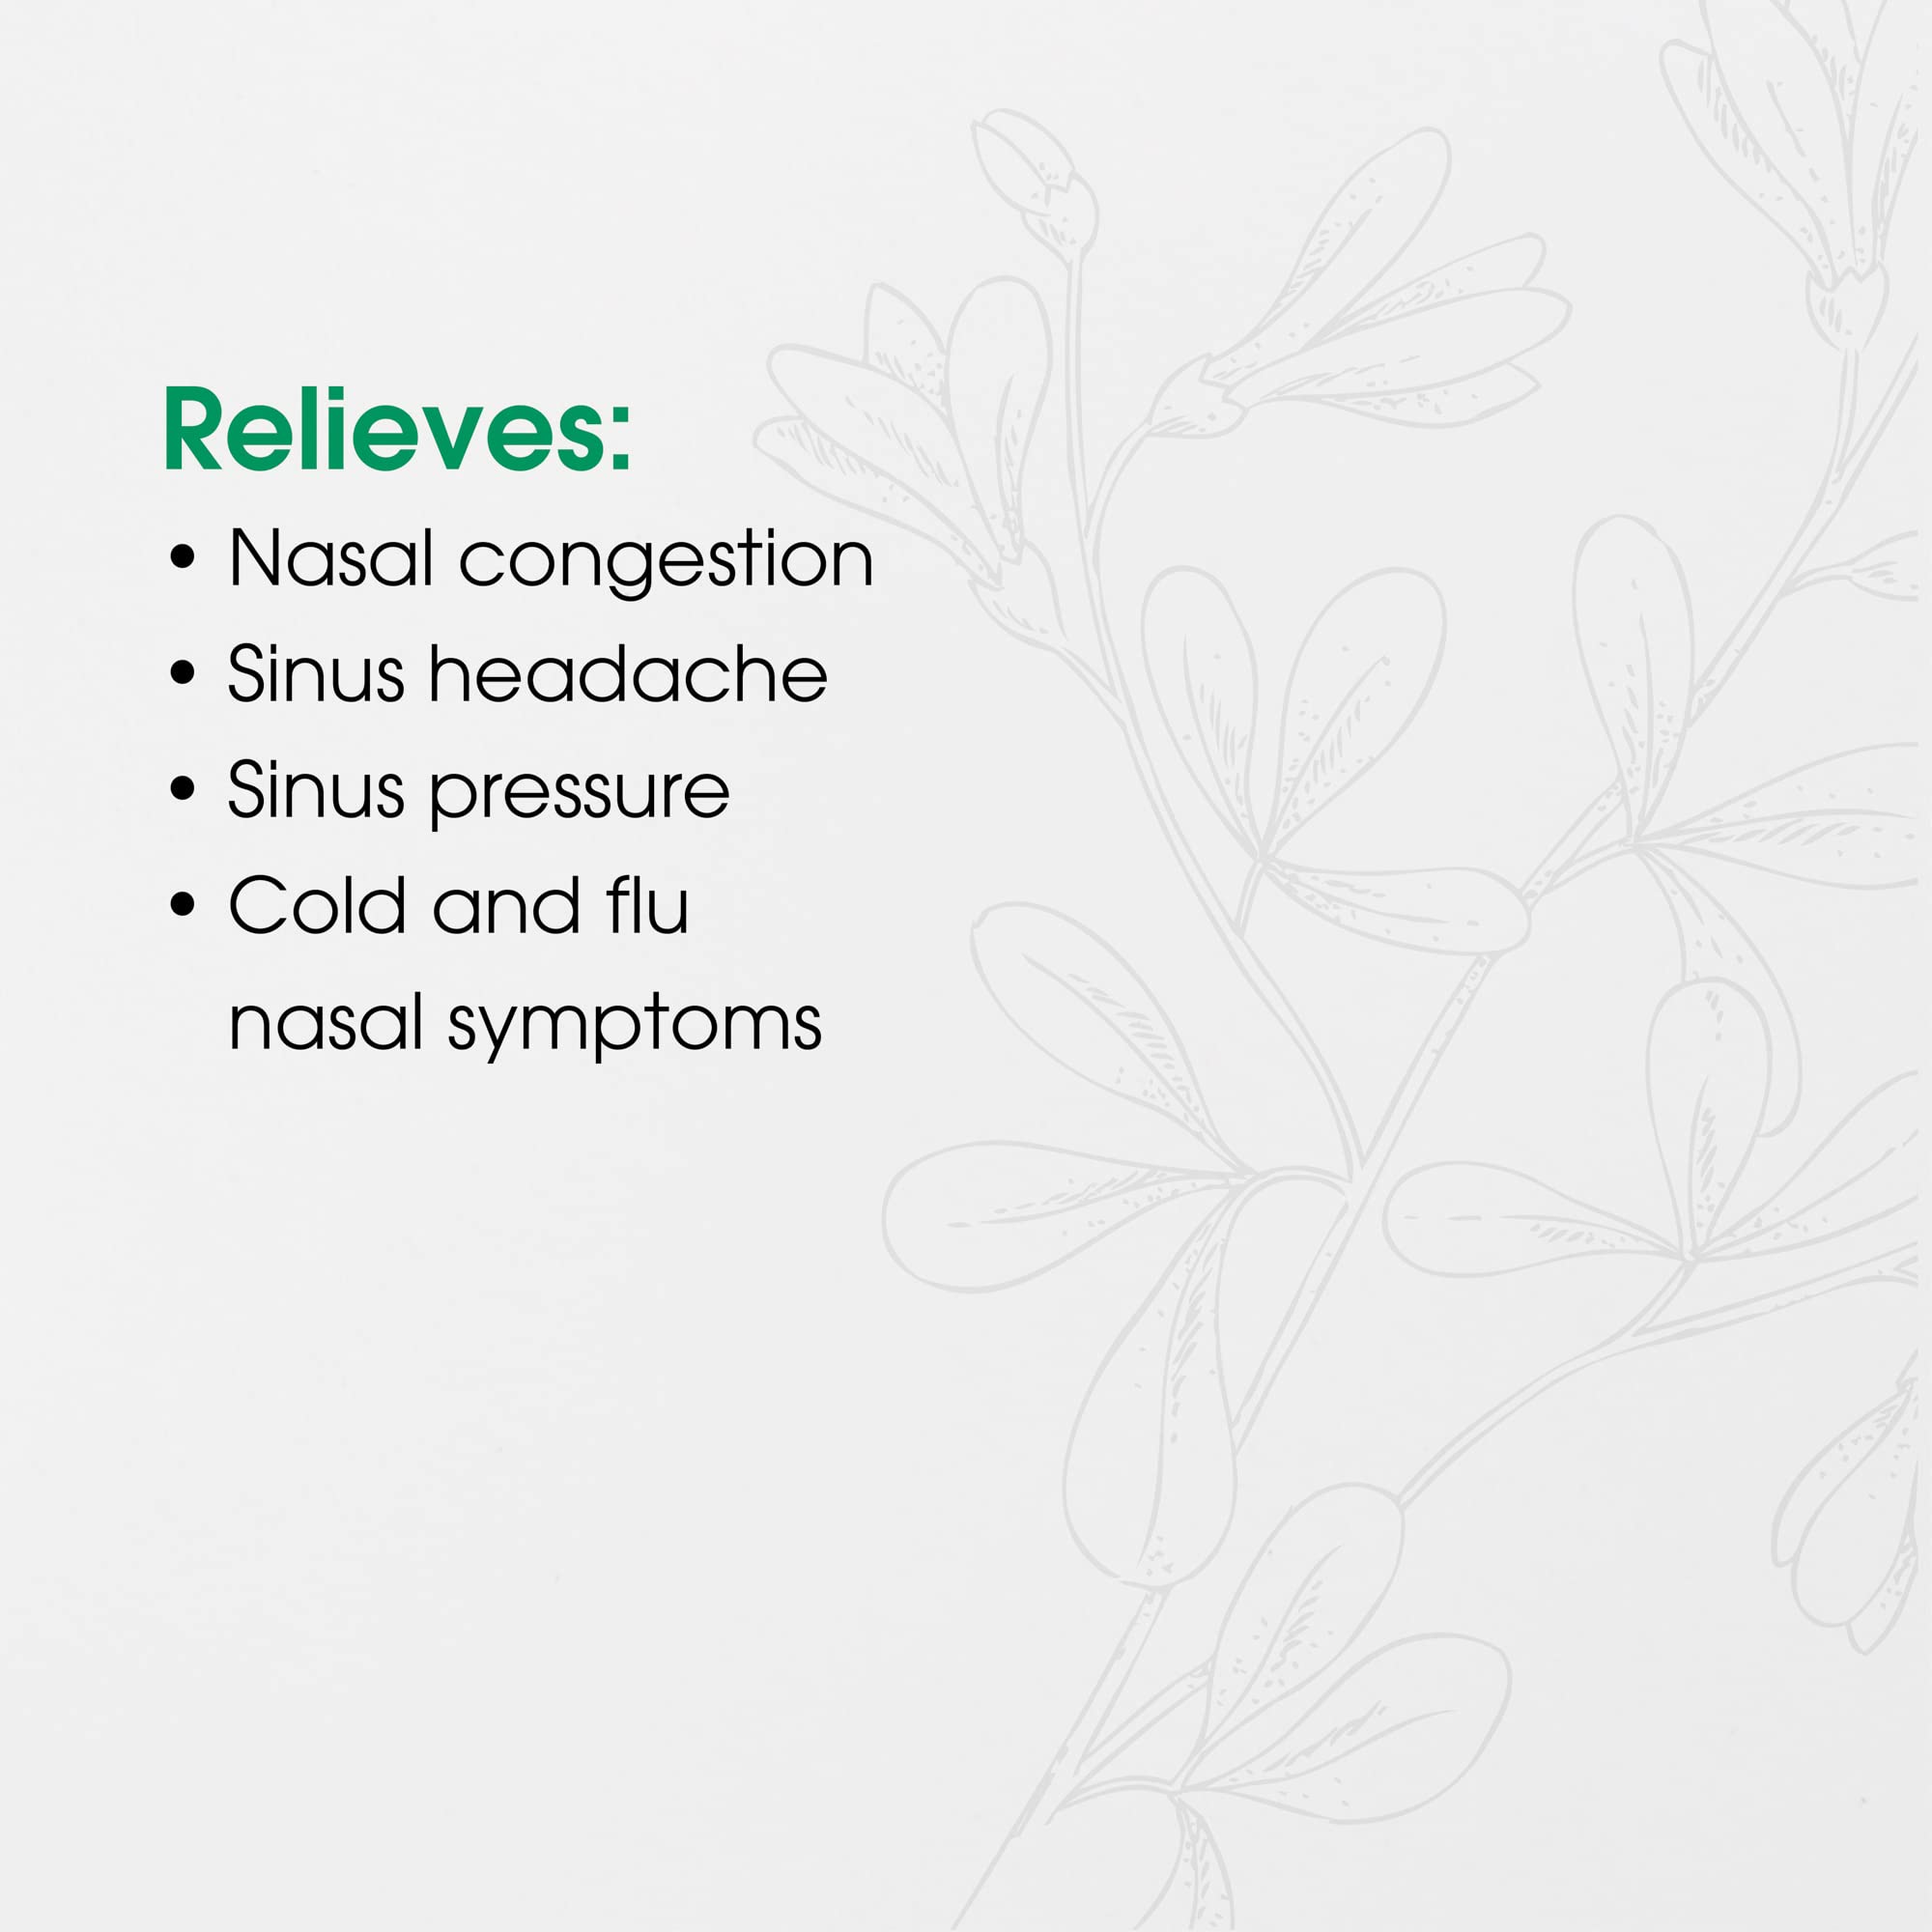 BHI Flu + Cold/Flu Symptom Relief Natural, Safe Homeopathic Relief - 100ct, BHI Mucus, Natural Chest Congestion Relief and Mucus Build-up -100ct and BHI Sinus Congestion Relief 100ct Bundle